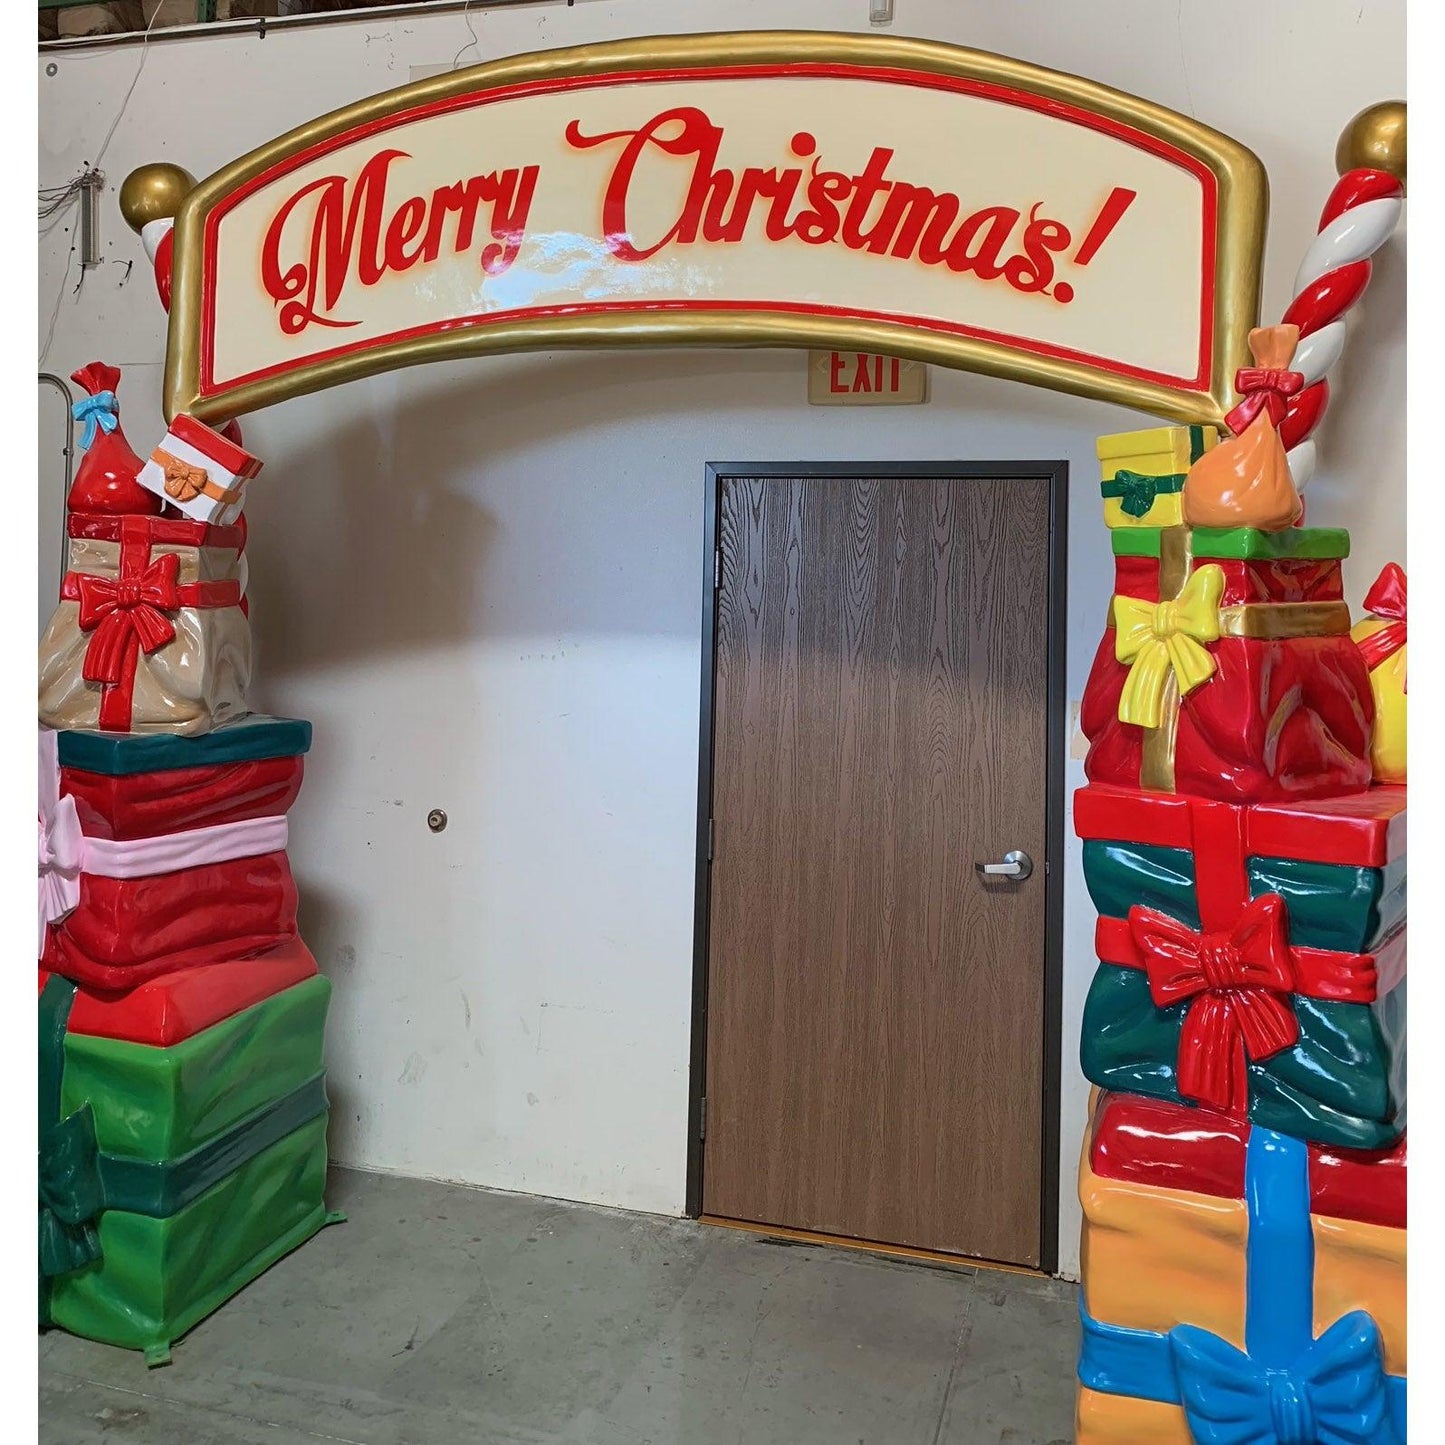 Merry Christmas Gifts Archway Statue - LM Treasures Prop Rentals 